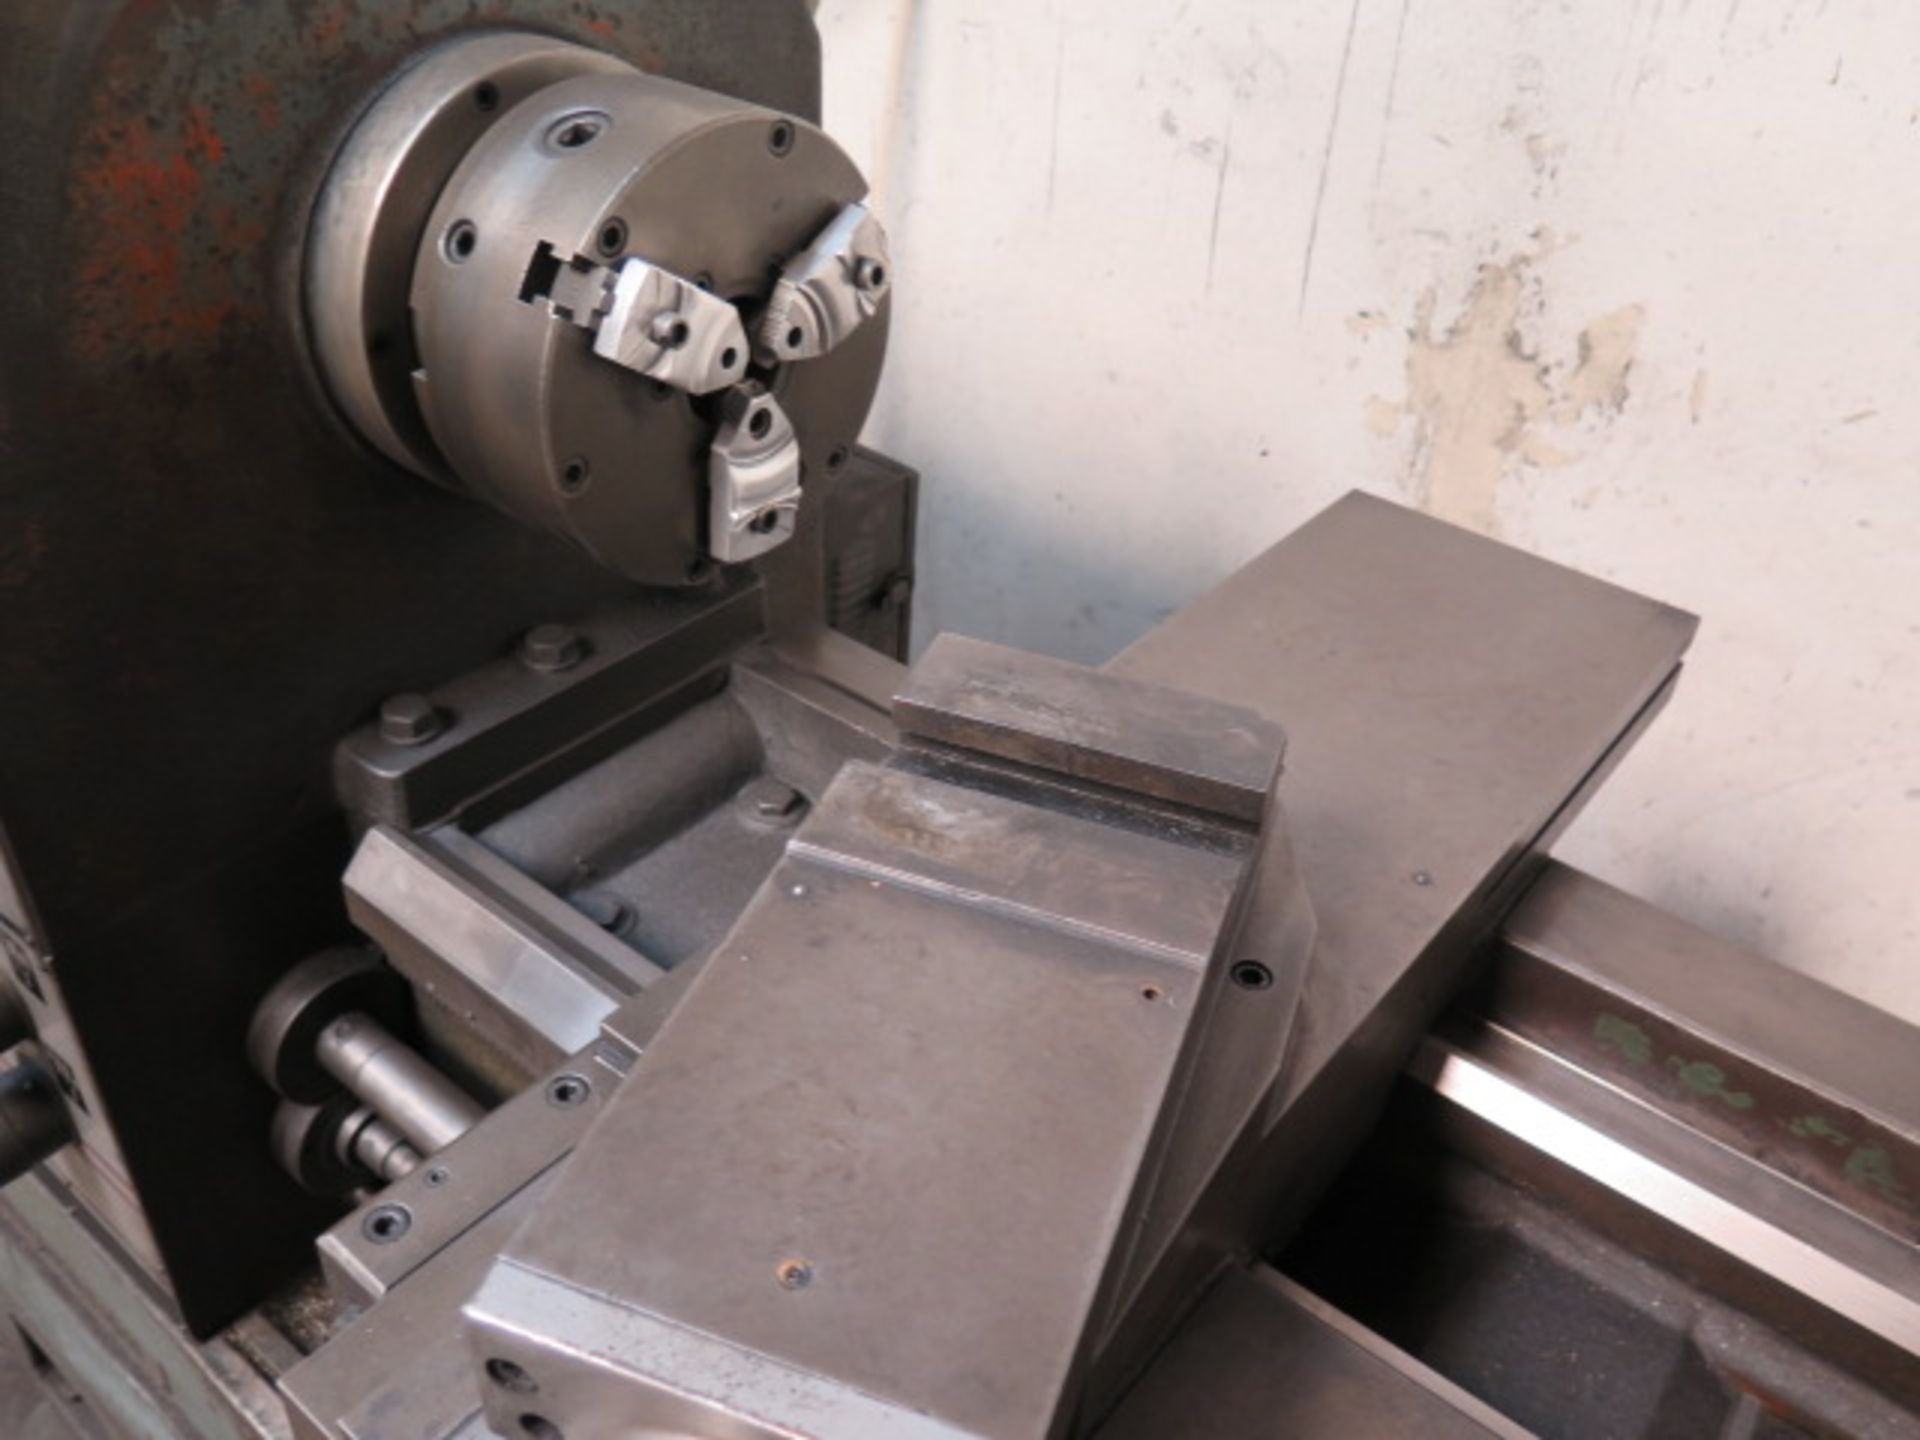 Japan Machinery Corp NL-20X60 20” x 60” Gap Bed Lathe w/Inch/mm Threading, Tailstock, SOLD AS IS - Image 6 of 20